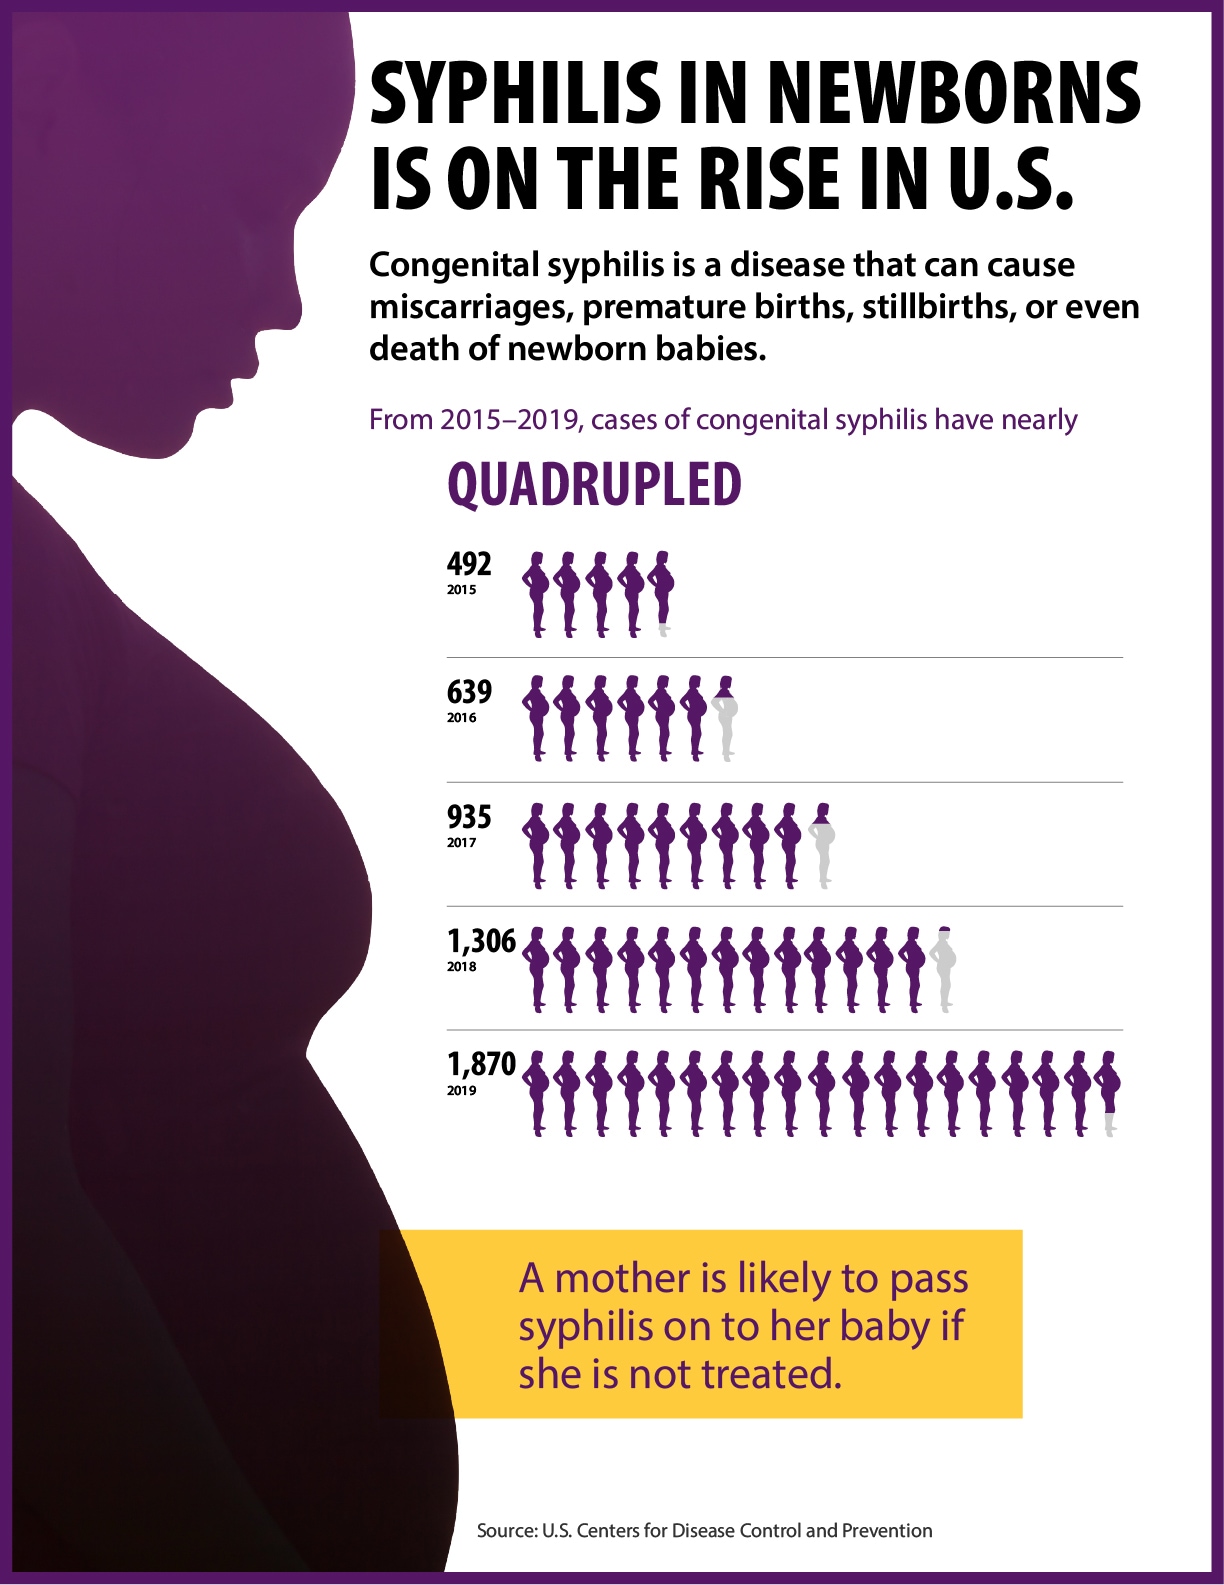 Syphilis in Newborns Is on the Rise in U.S.  The graphic states that congenital syphilis is a disease that can cause miscarriages, premature births, stillbirths, or even death of newborn babies.   The graphic shows that cases of congenital syphilis have nearly quadrupled between 2015 and 2019. There were 492 cases of congenital syphilis in 2015, 639 cases in 2016, 935 cases in 2017, 1,306 cases in 2018, and 1,870 cases in 2019.  The graphic states a mother is likely to pass syphilis on to her baby if she is not treated. 